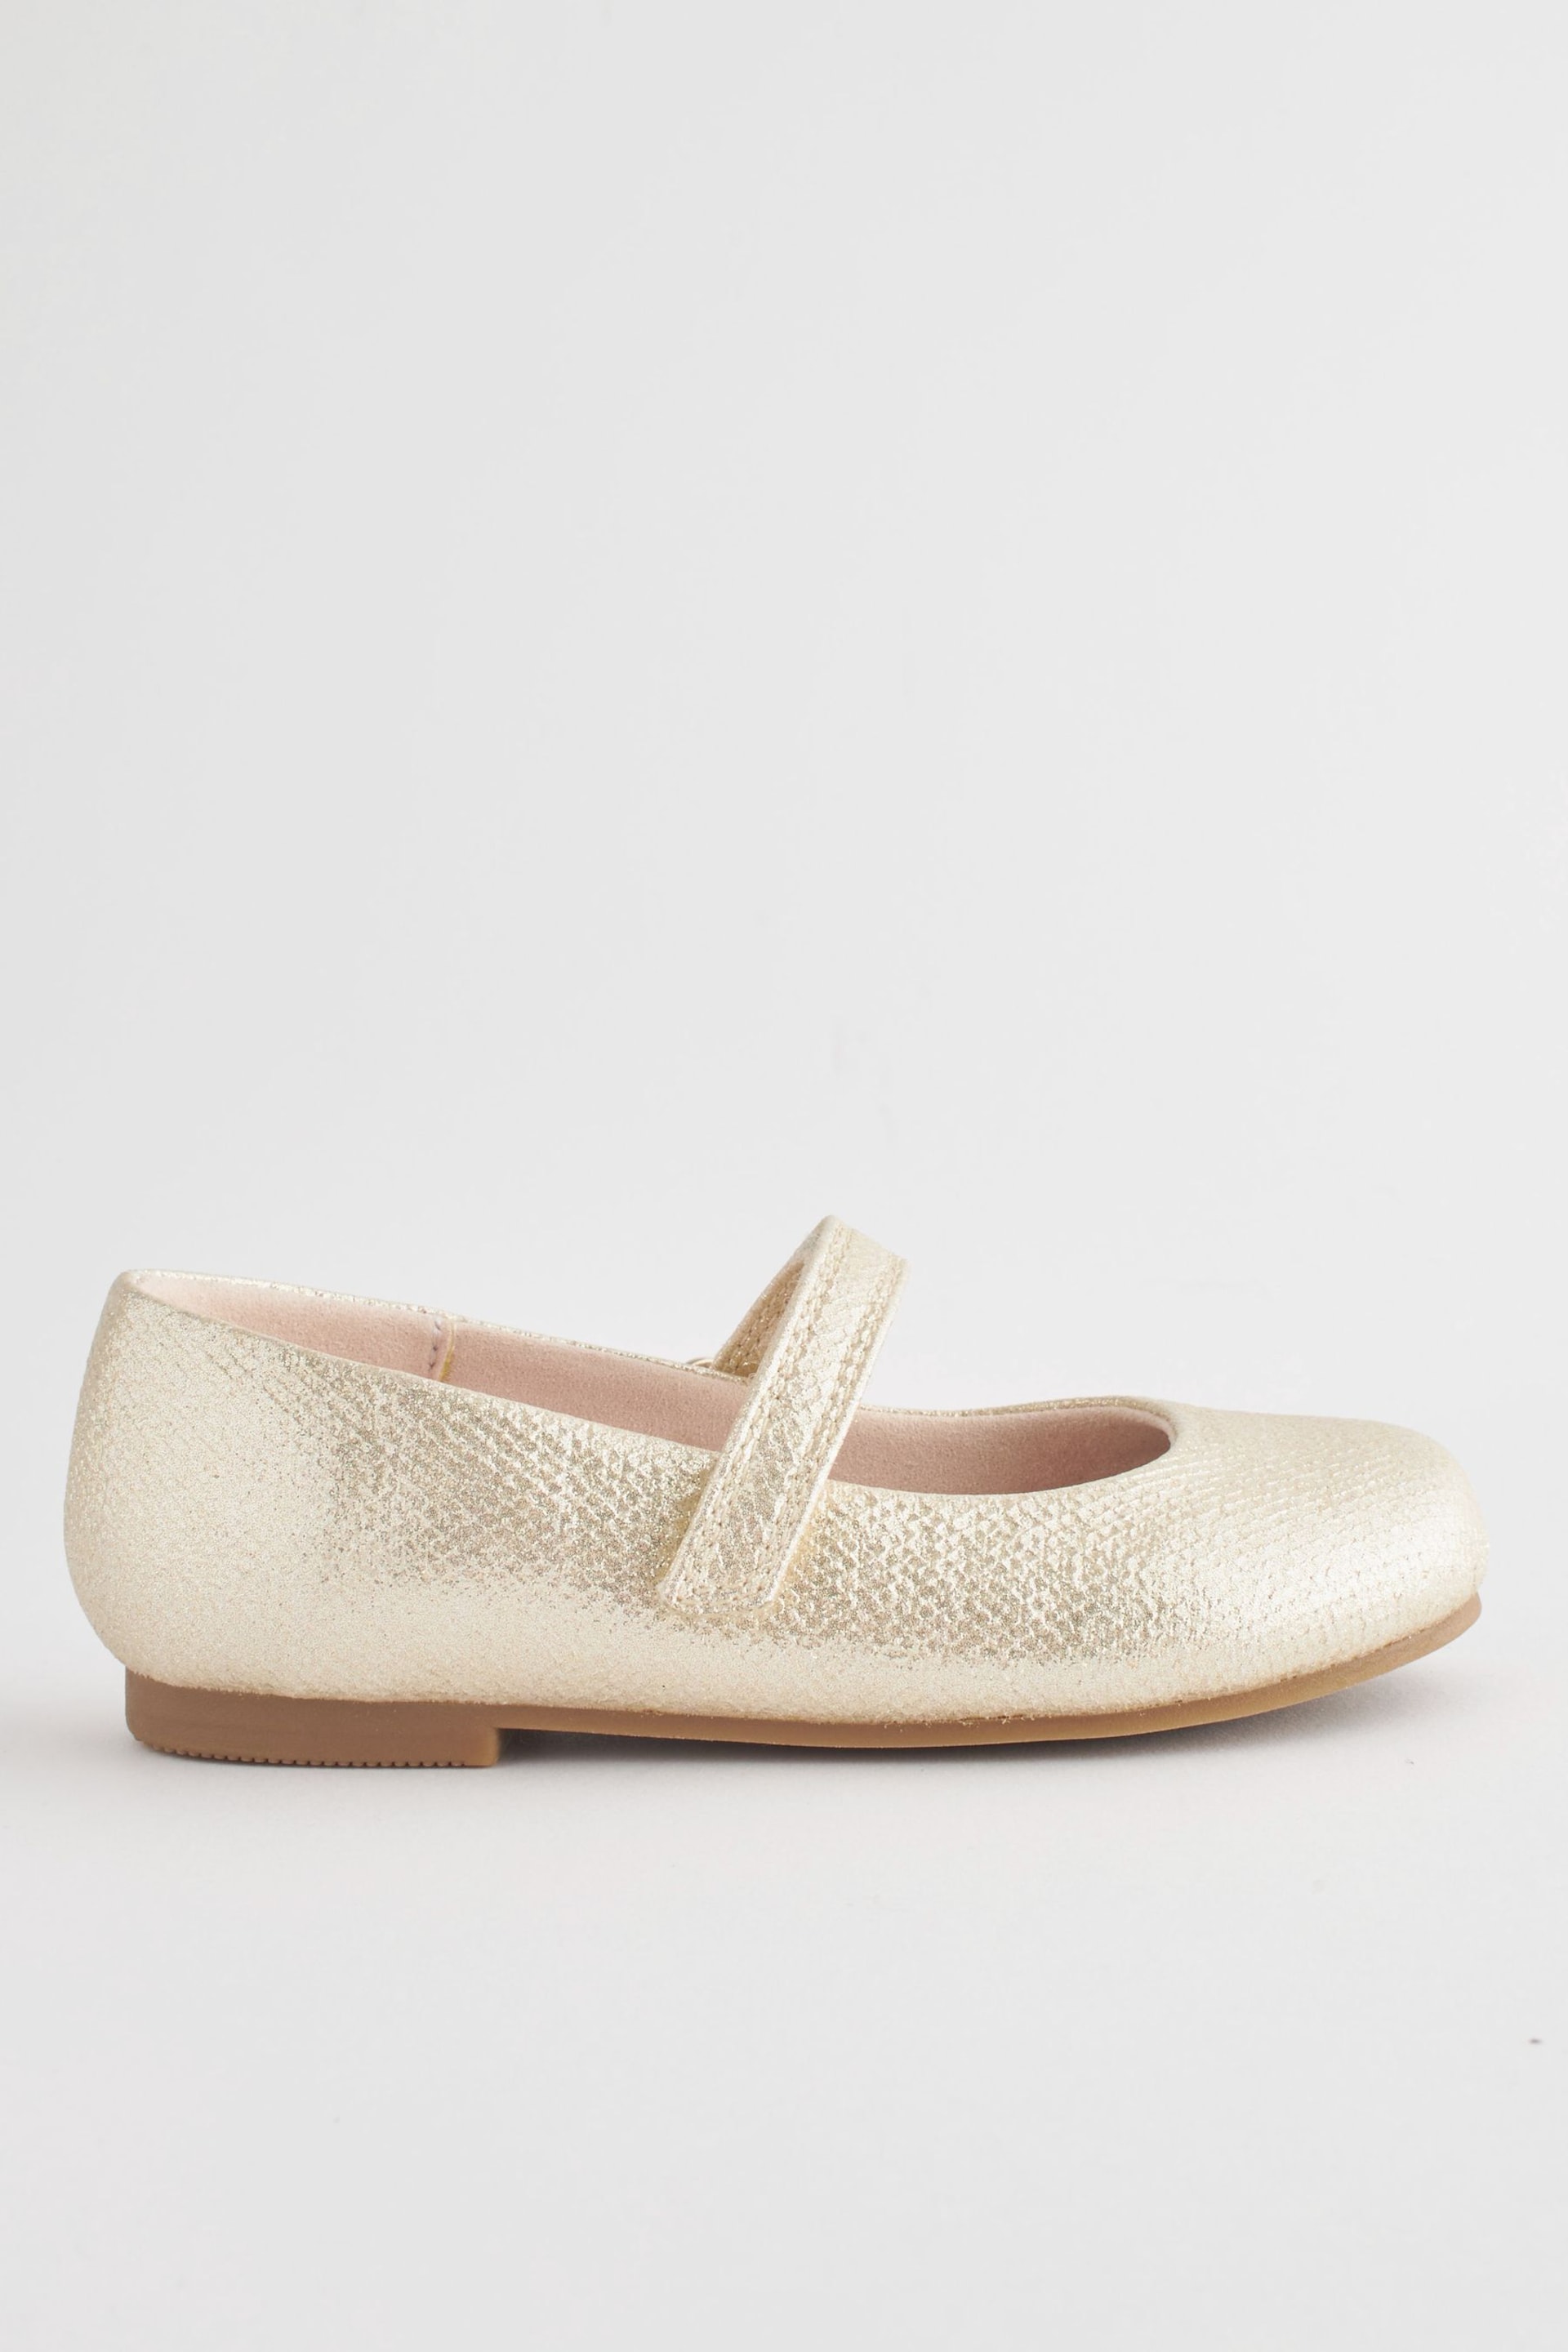 Gold Wide Fit (G) Mary Jane Occasion Shoes - Image 2 of 5